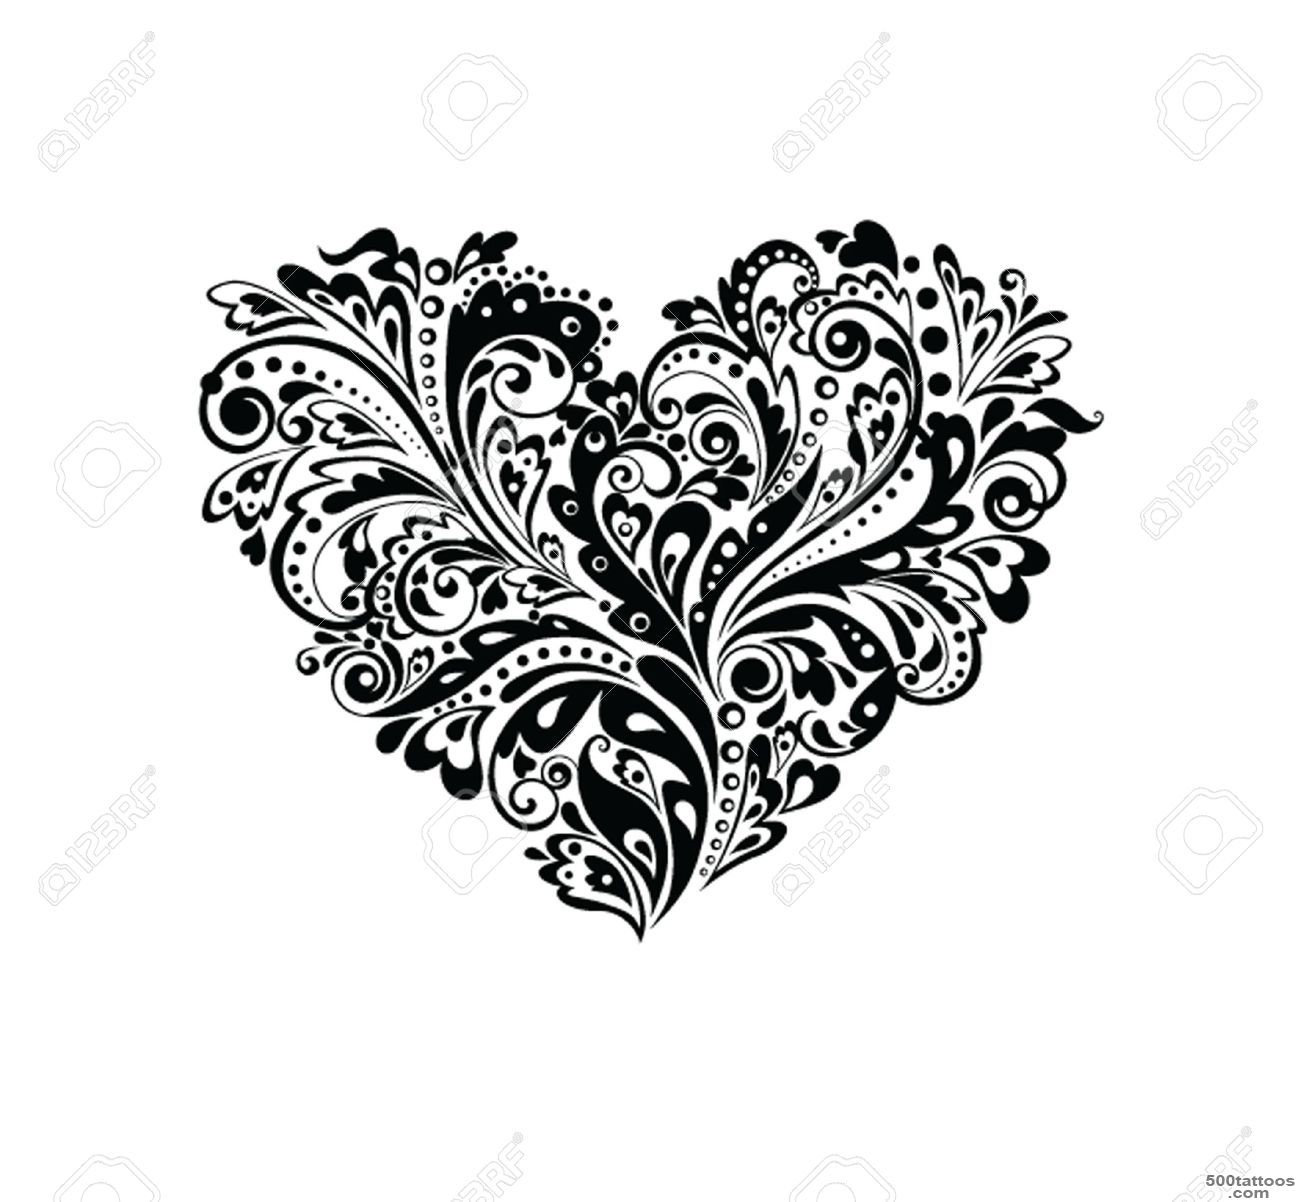 Heart And Flowers Tattoo Stock Photos Images, Royalty Free Heart ..._4